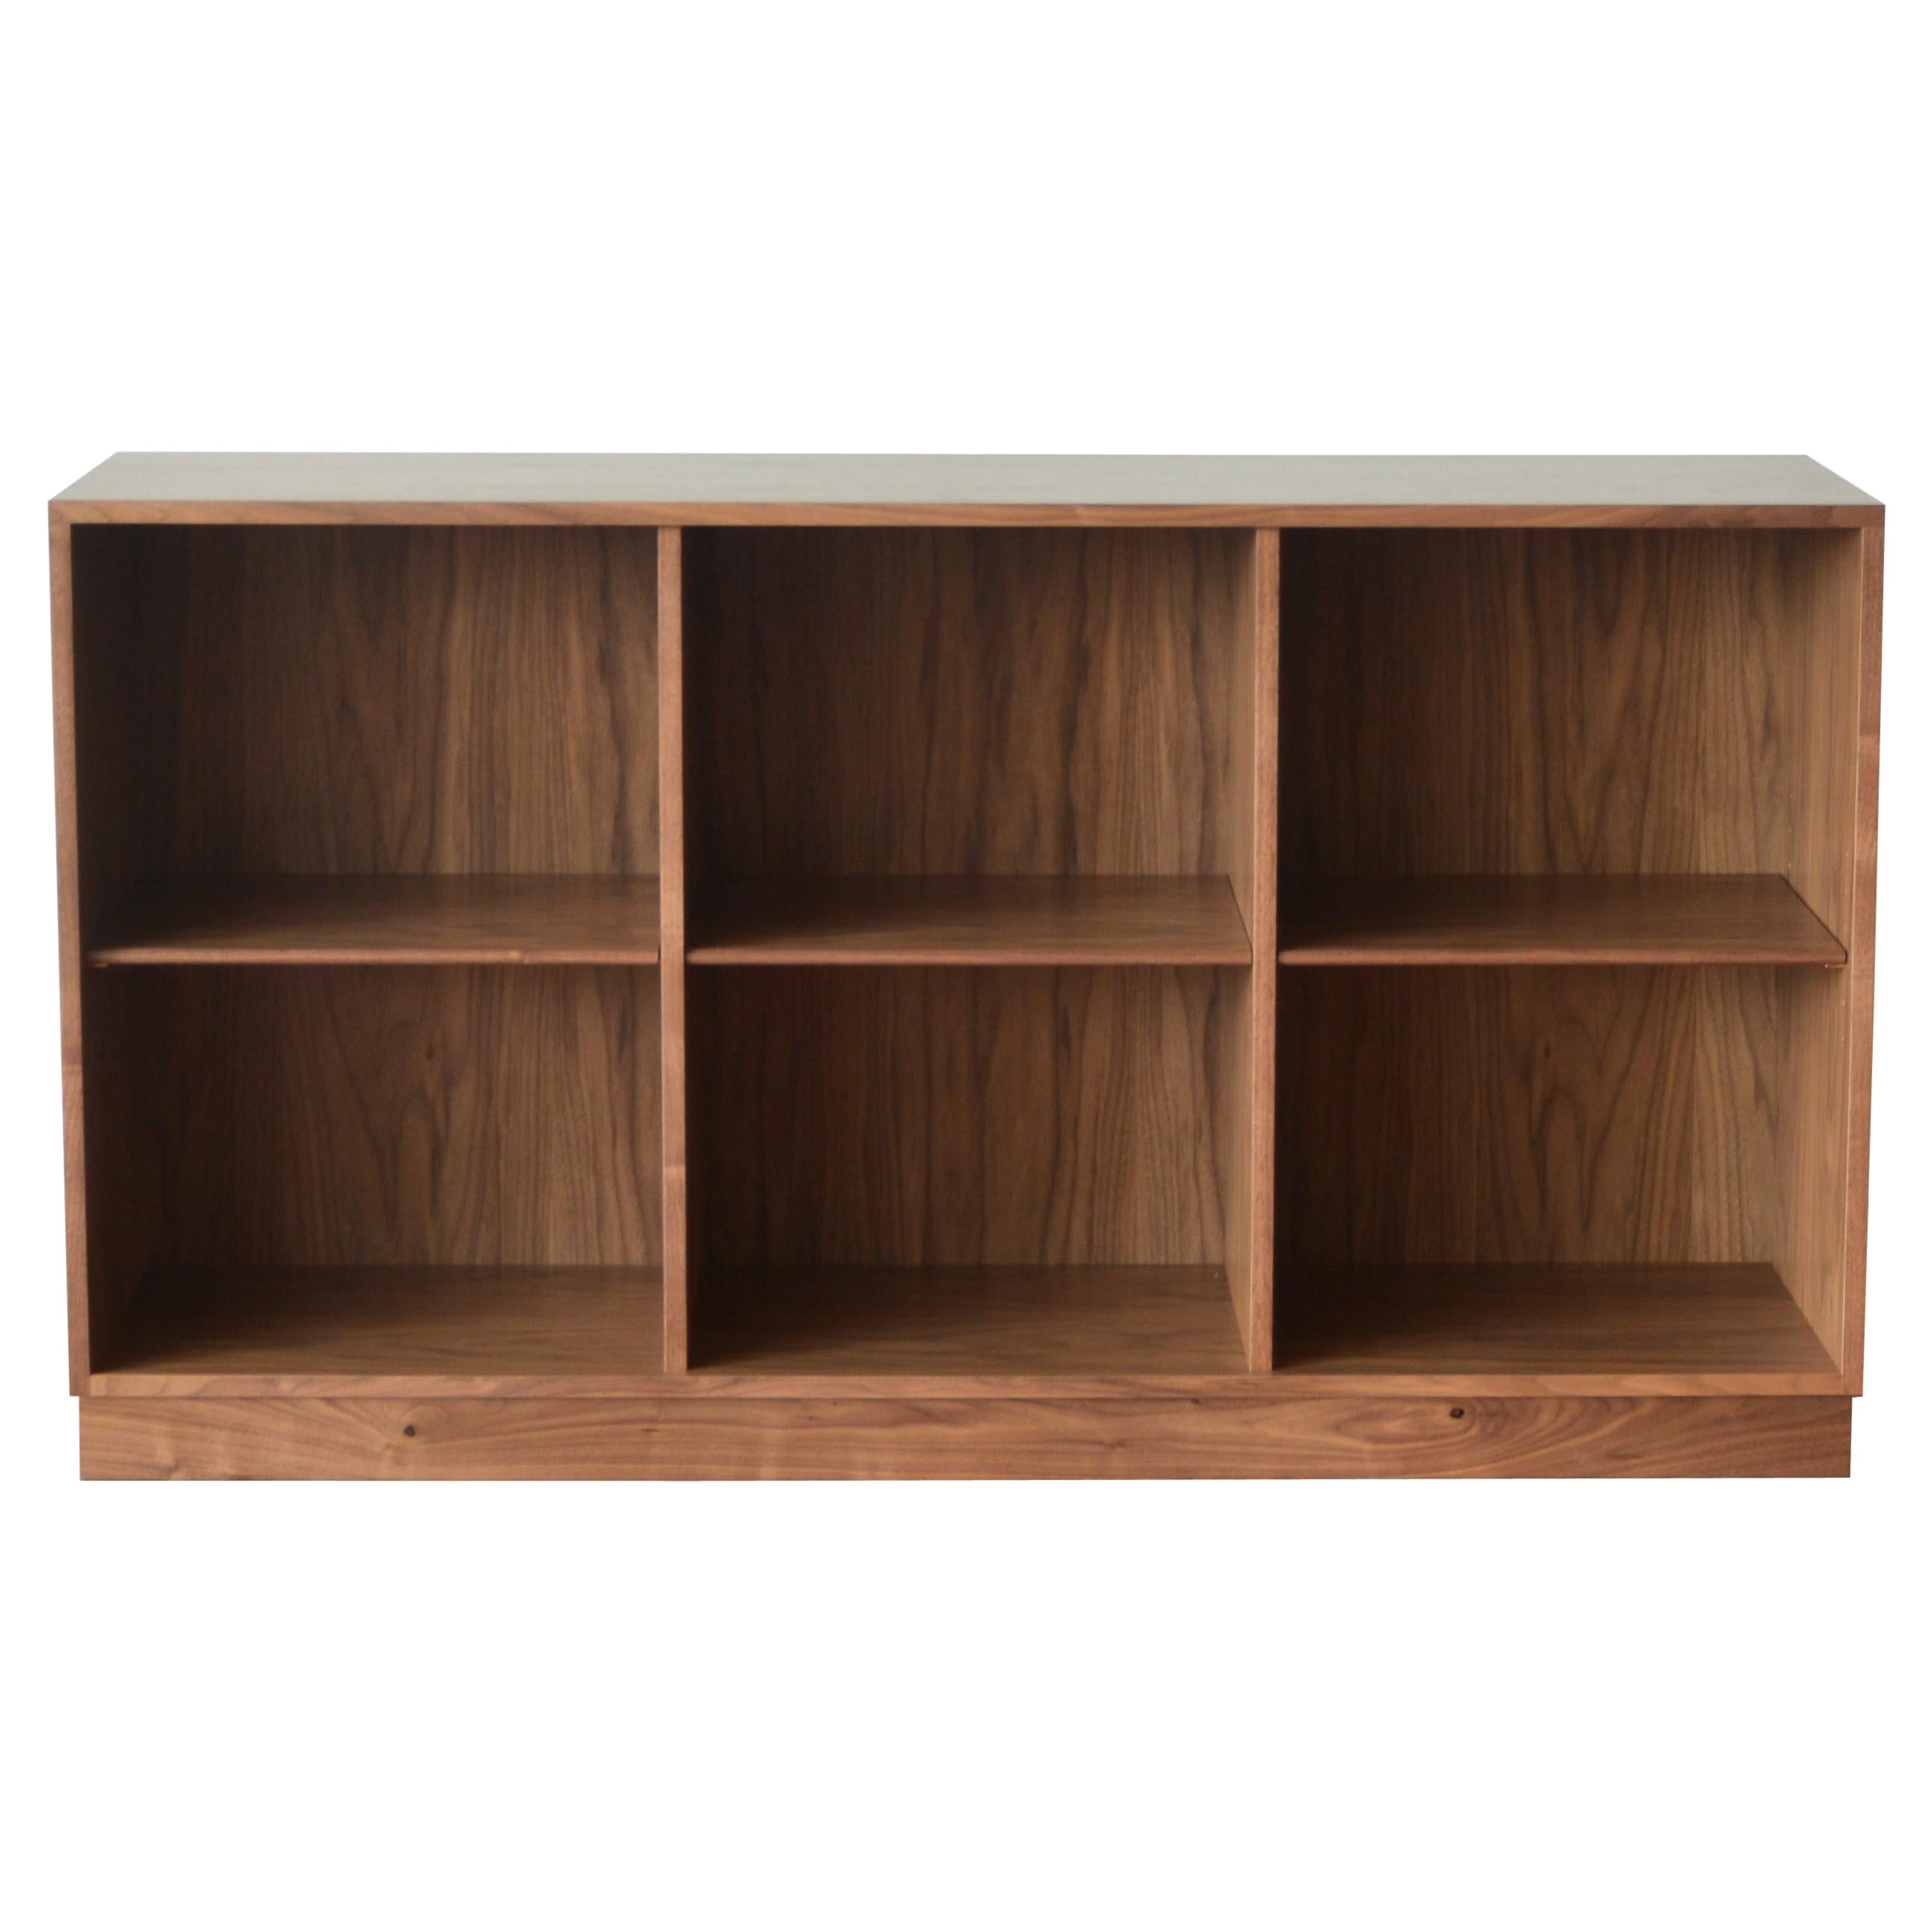 FF08 Low Bookcase in Walnut by Stokes Furniture